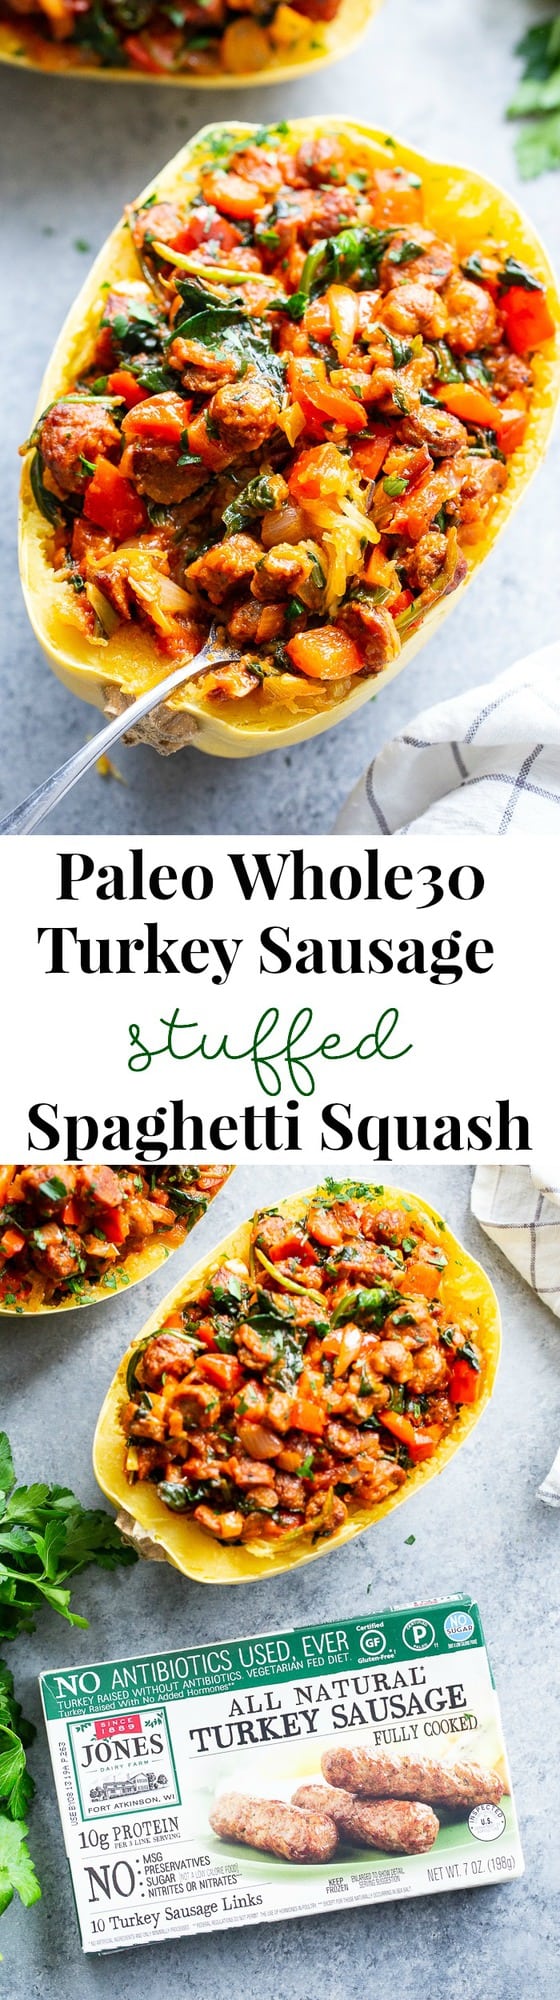 These Instant Pot Spaghetti Squash Boats are loaded with all the yummy things! Sugar free, antibiotic free turkey sausage, onions, peppers, garlic, spinach and marinara make this a healthy, filling dinner that’s paleo, Whole30 compliant and keto friendly too!  #AD @jonesdairyfarm #JonesDairyFarm 